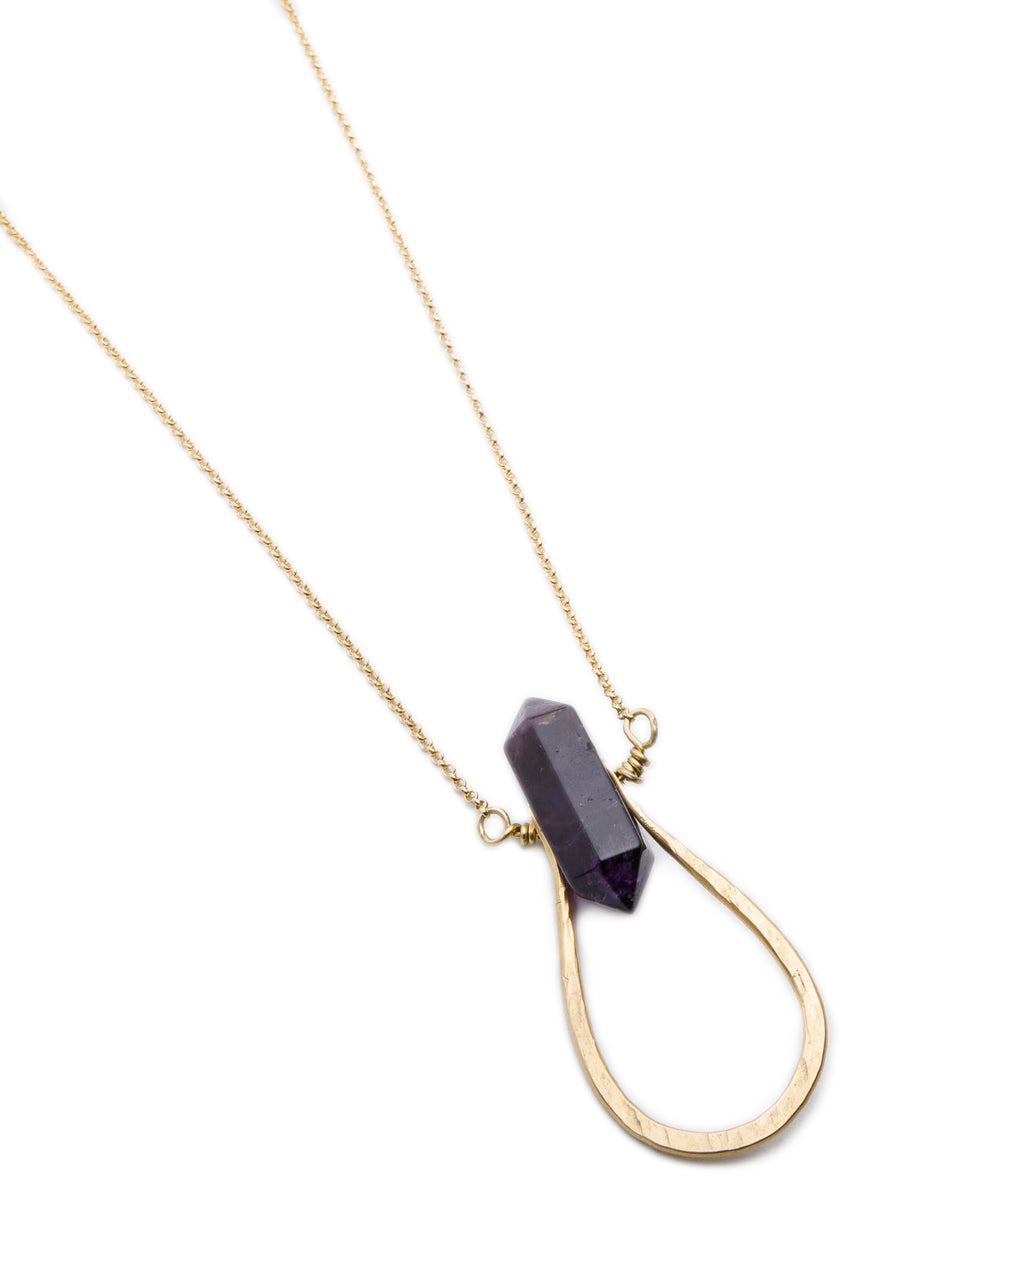 Pinched “U” Amethyst Point Necklace